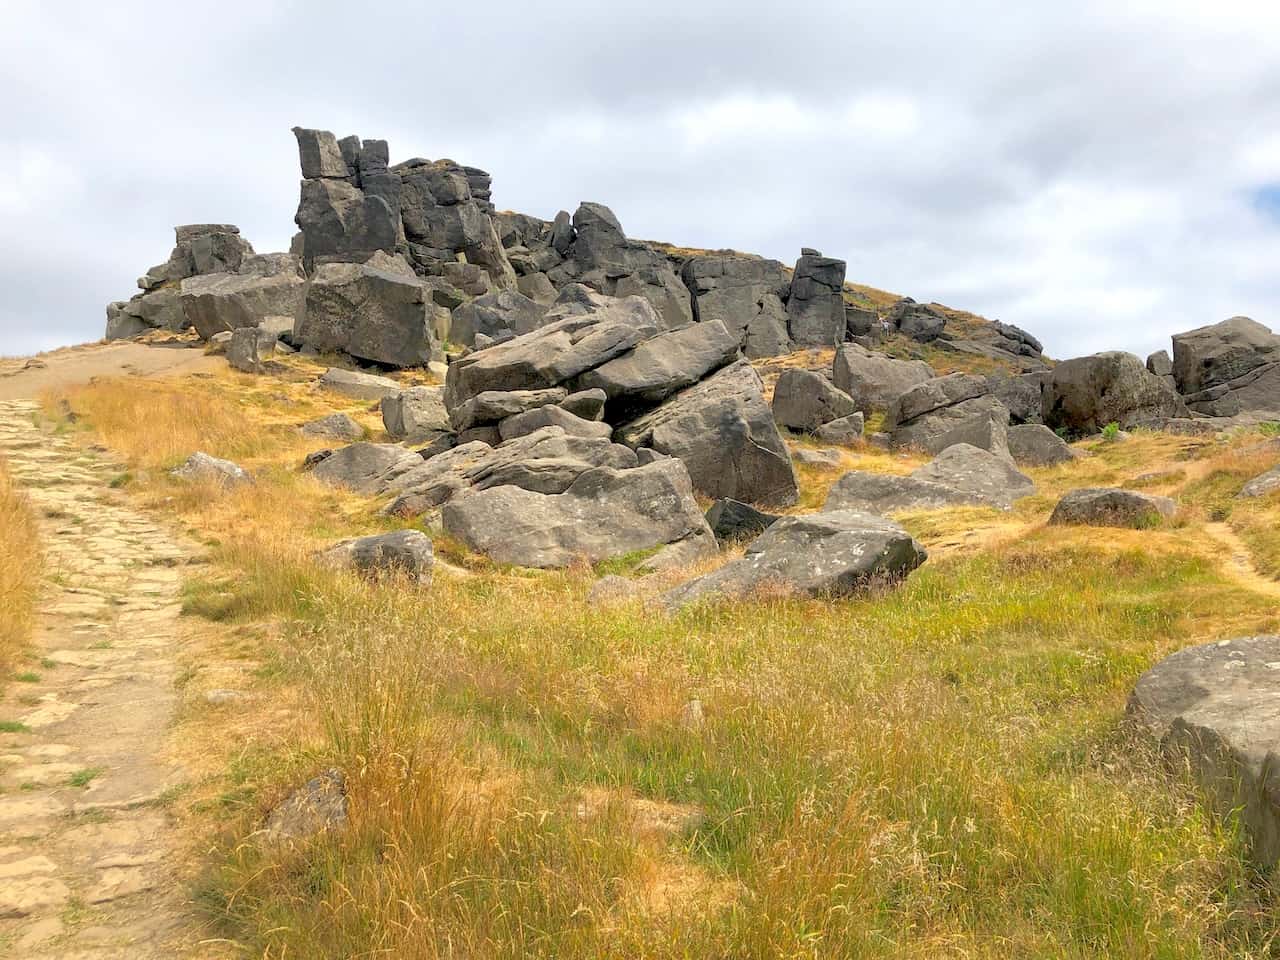 The Wainstones, a striking rocky outcrop at the western extremity of Hasty Bank, presents a rugged face to the observer.